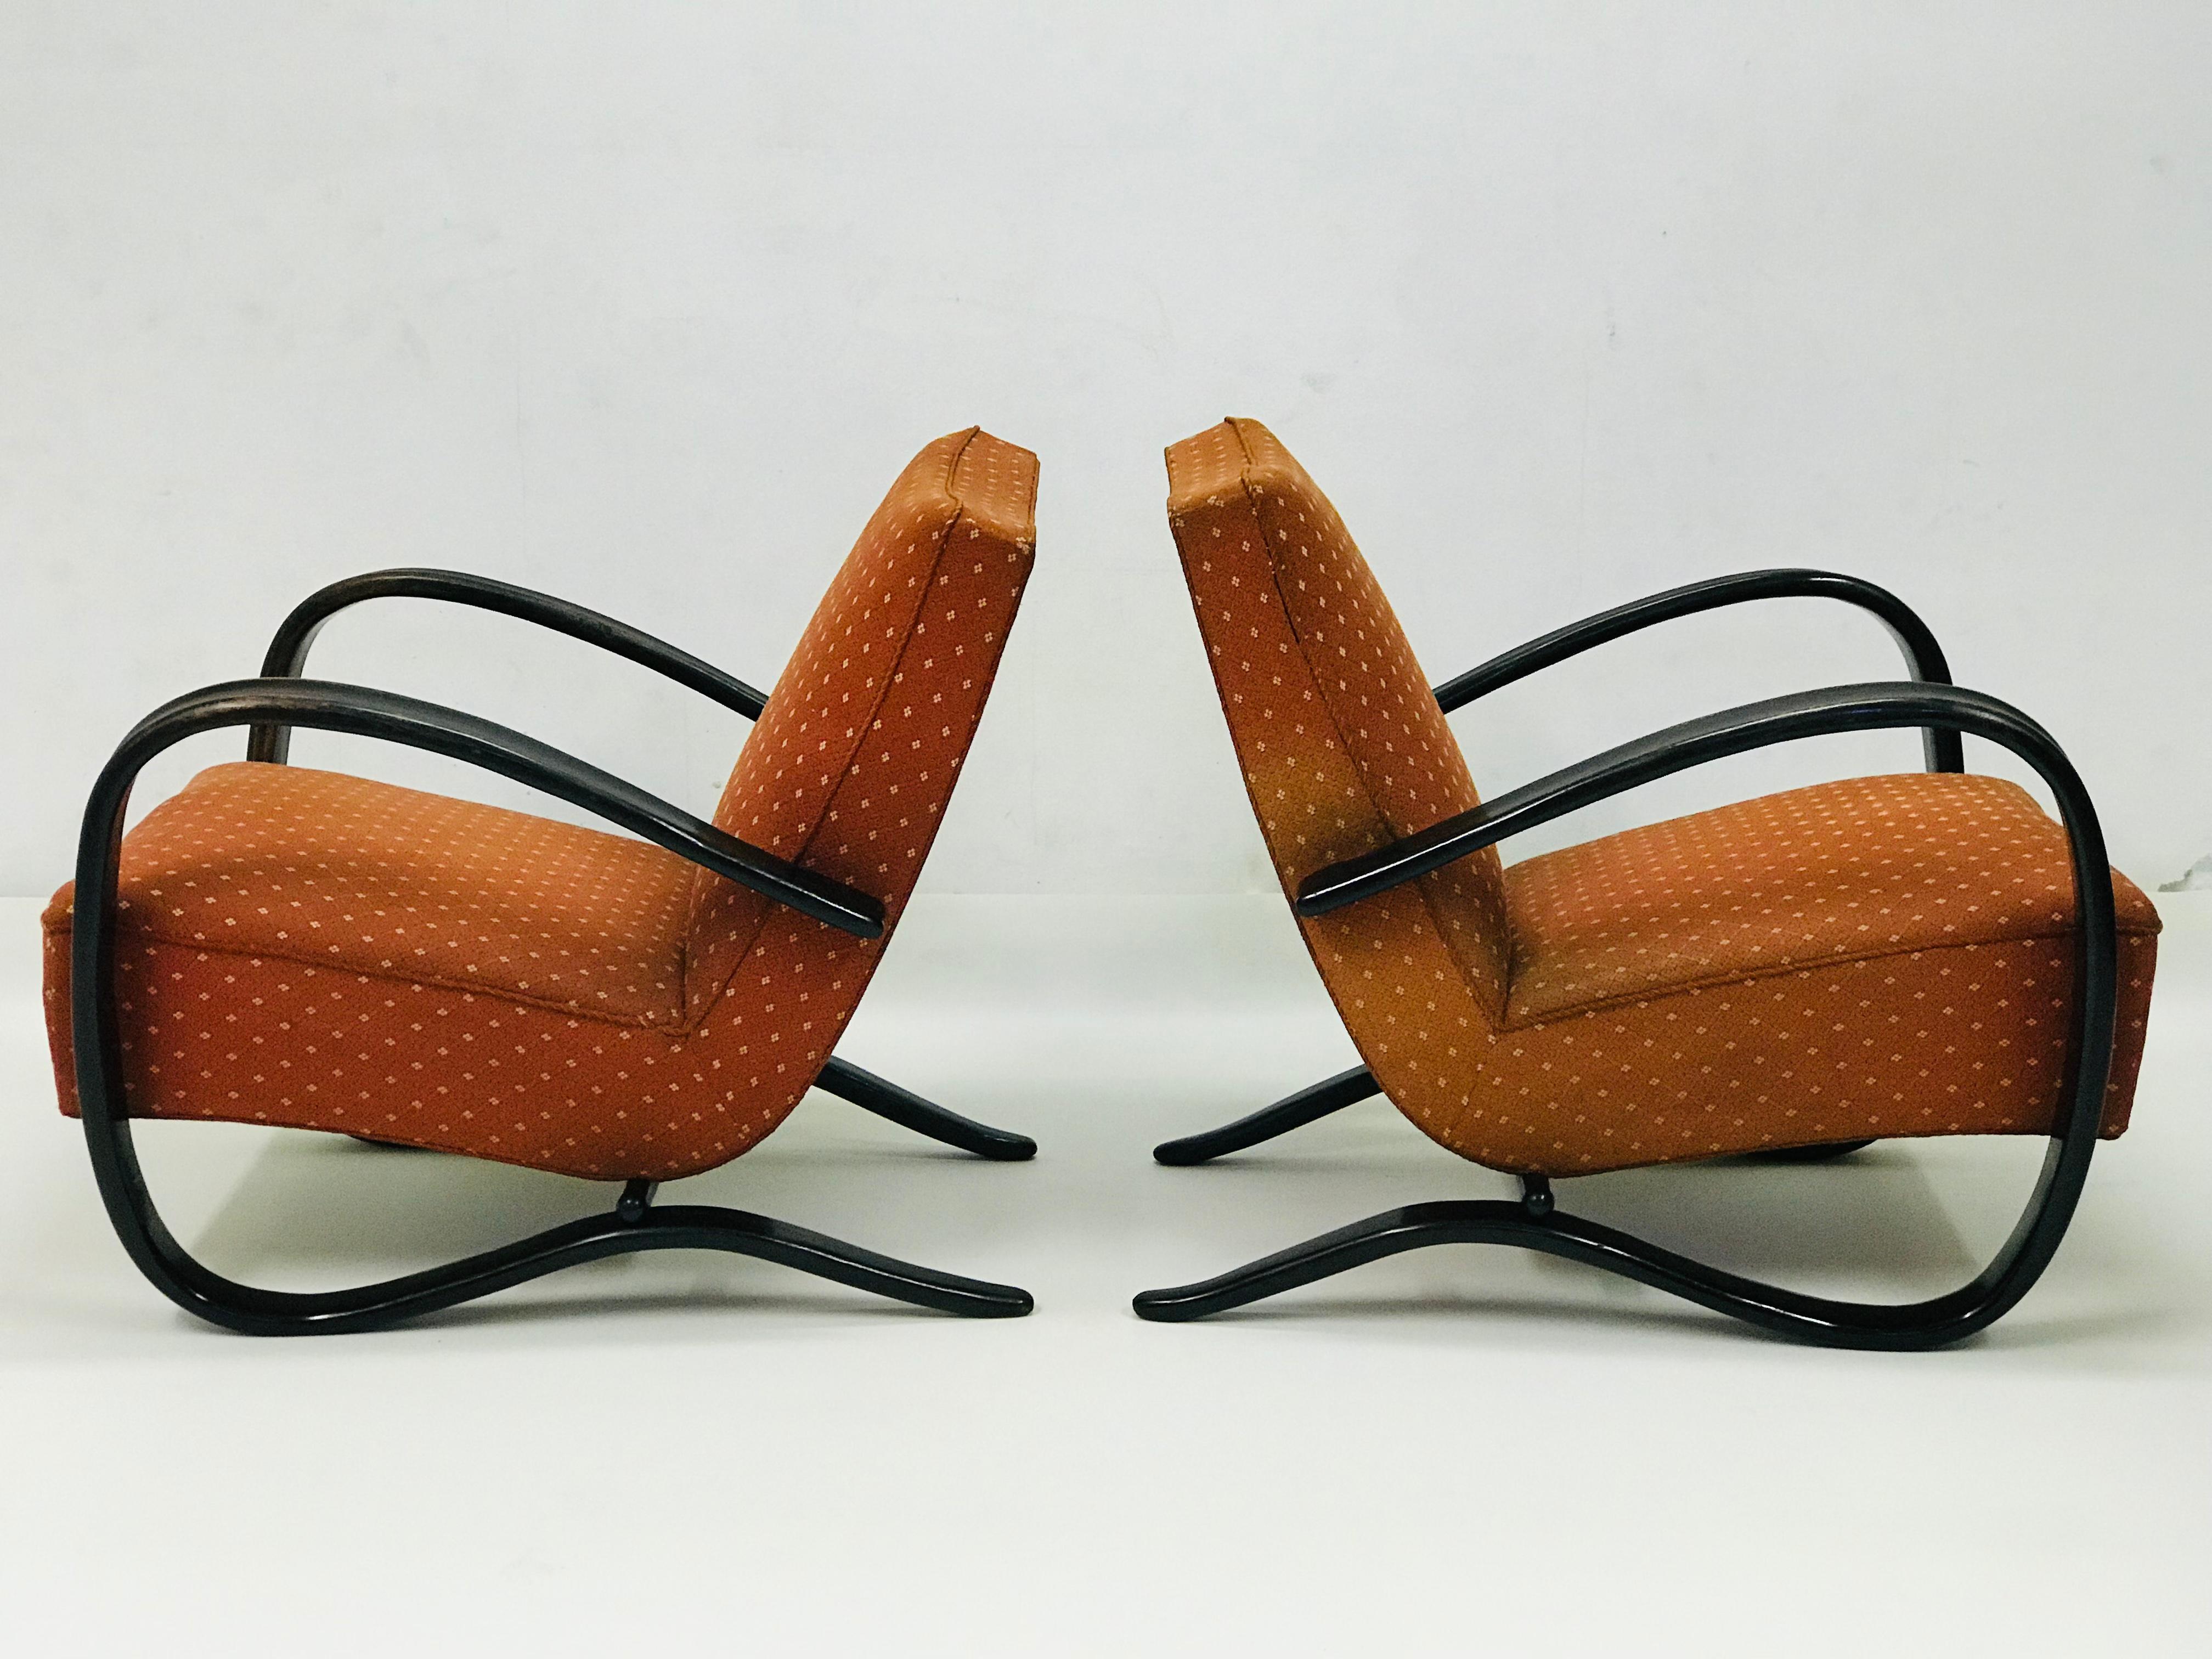 H-269 are in their original condition.
The armchairs have original textiles and wood color.